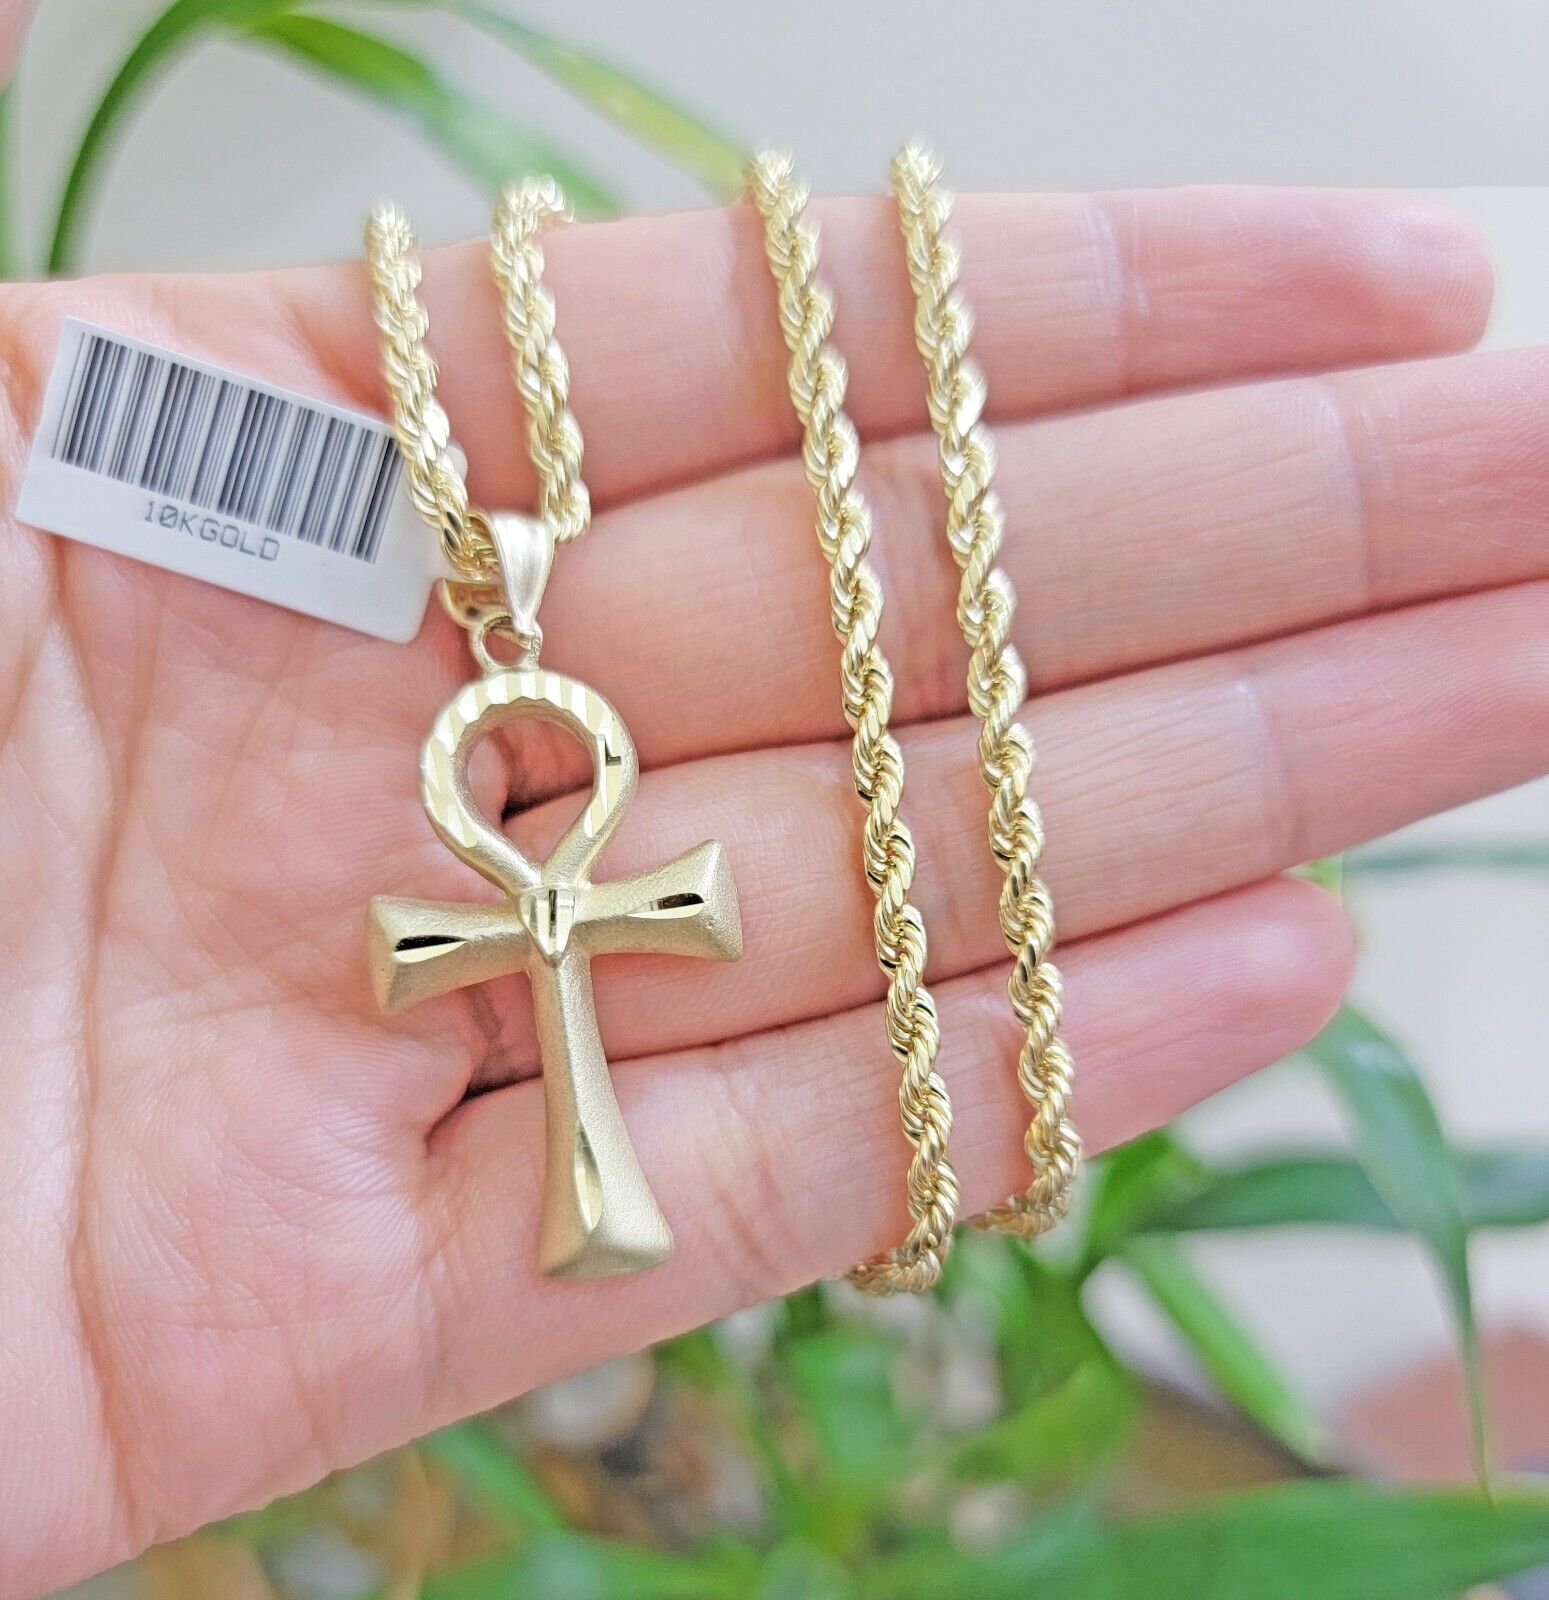 My Cross with Charms Necklace